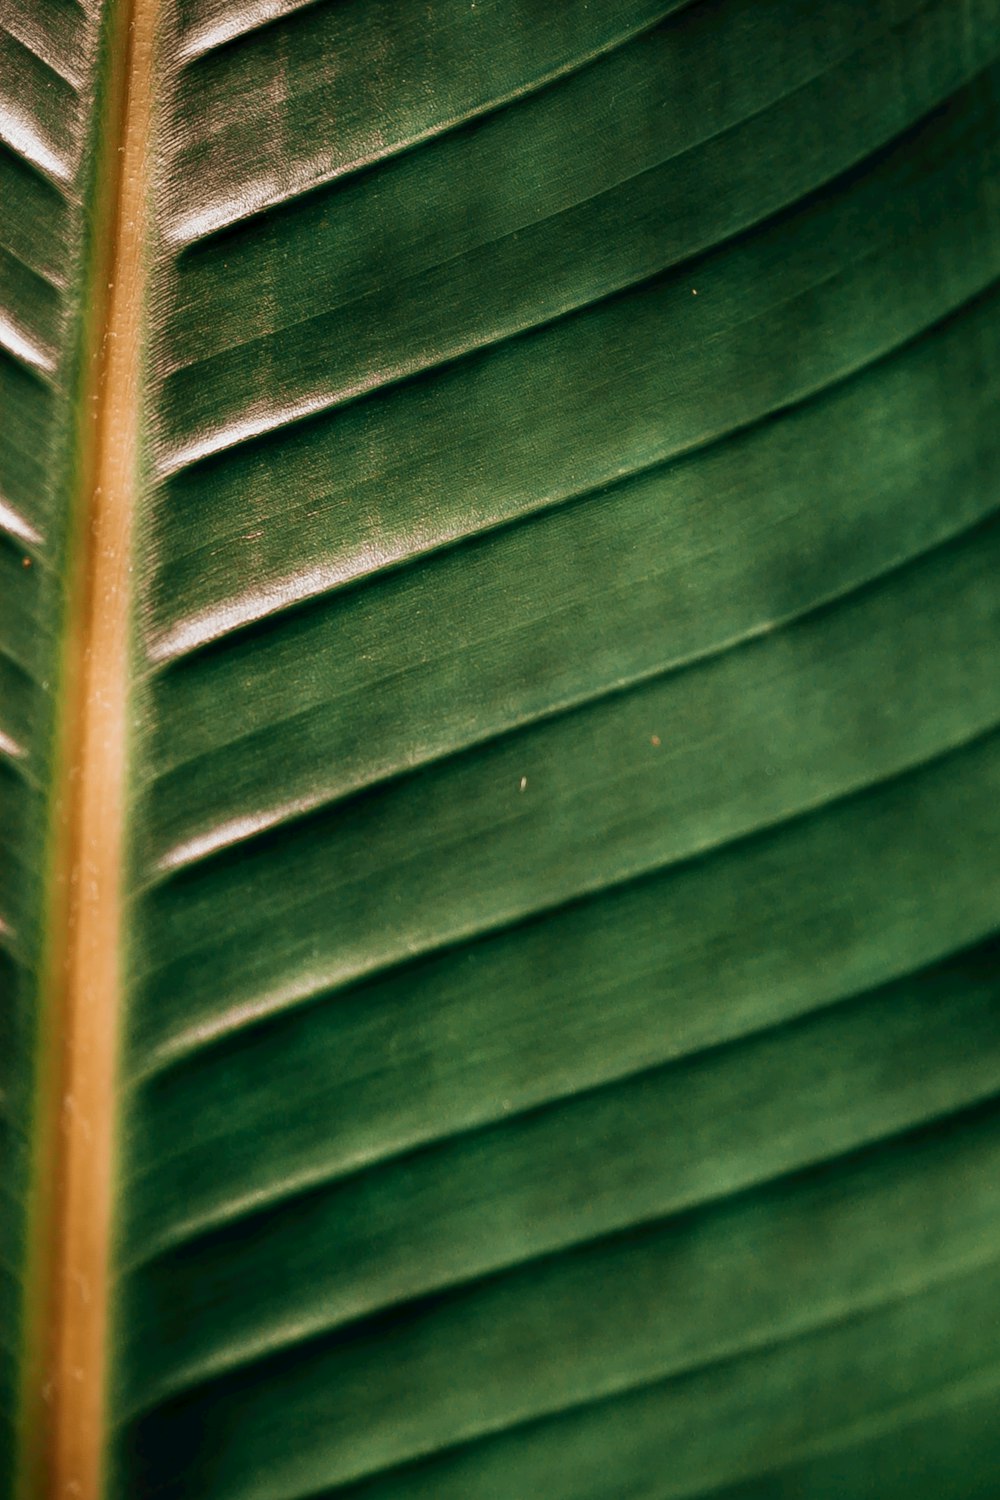 green and brown leaf in close up photography